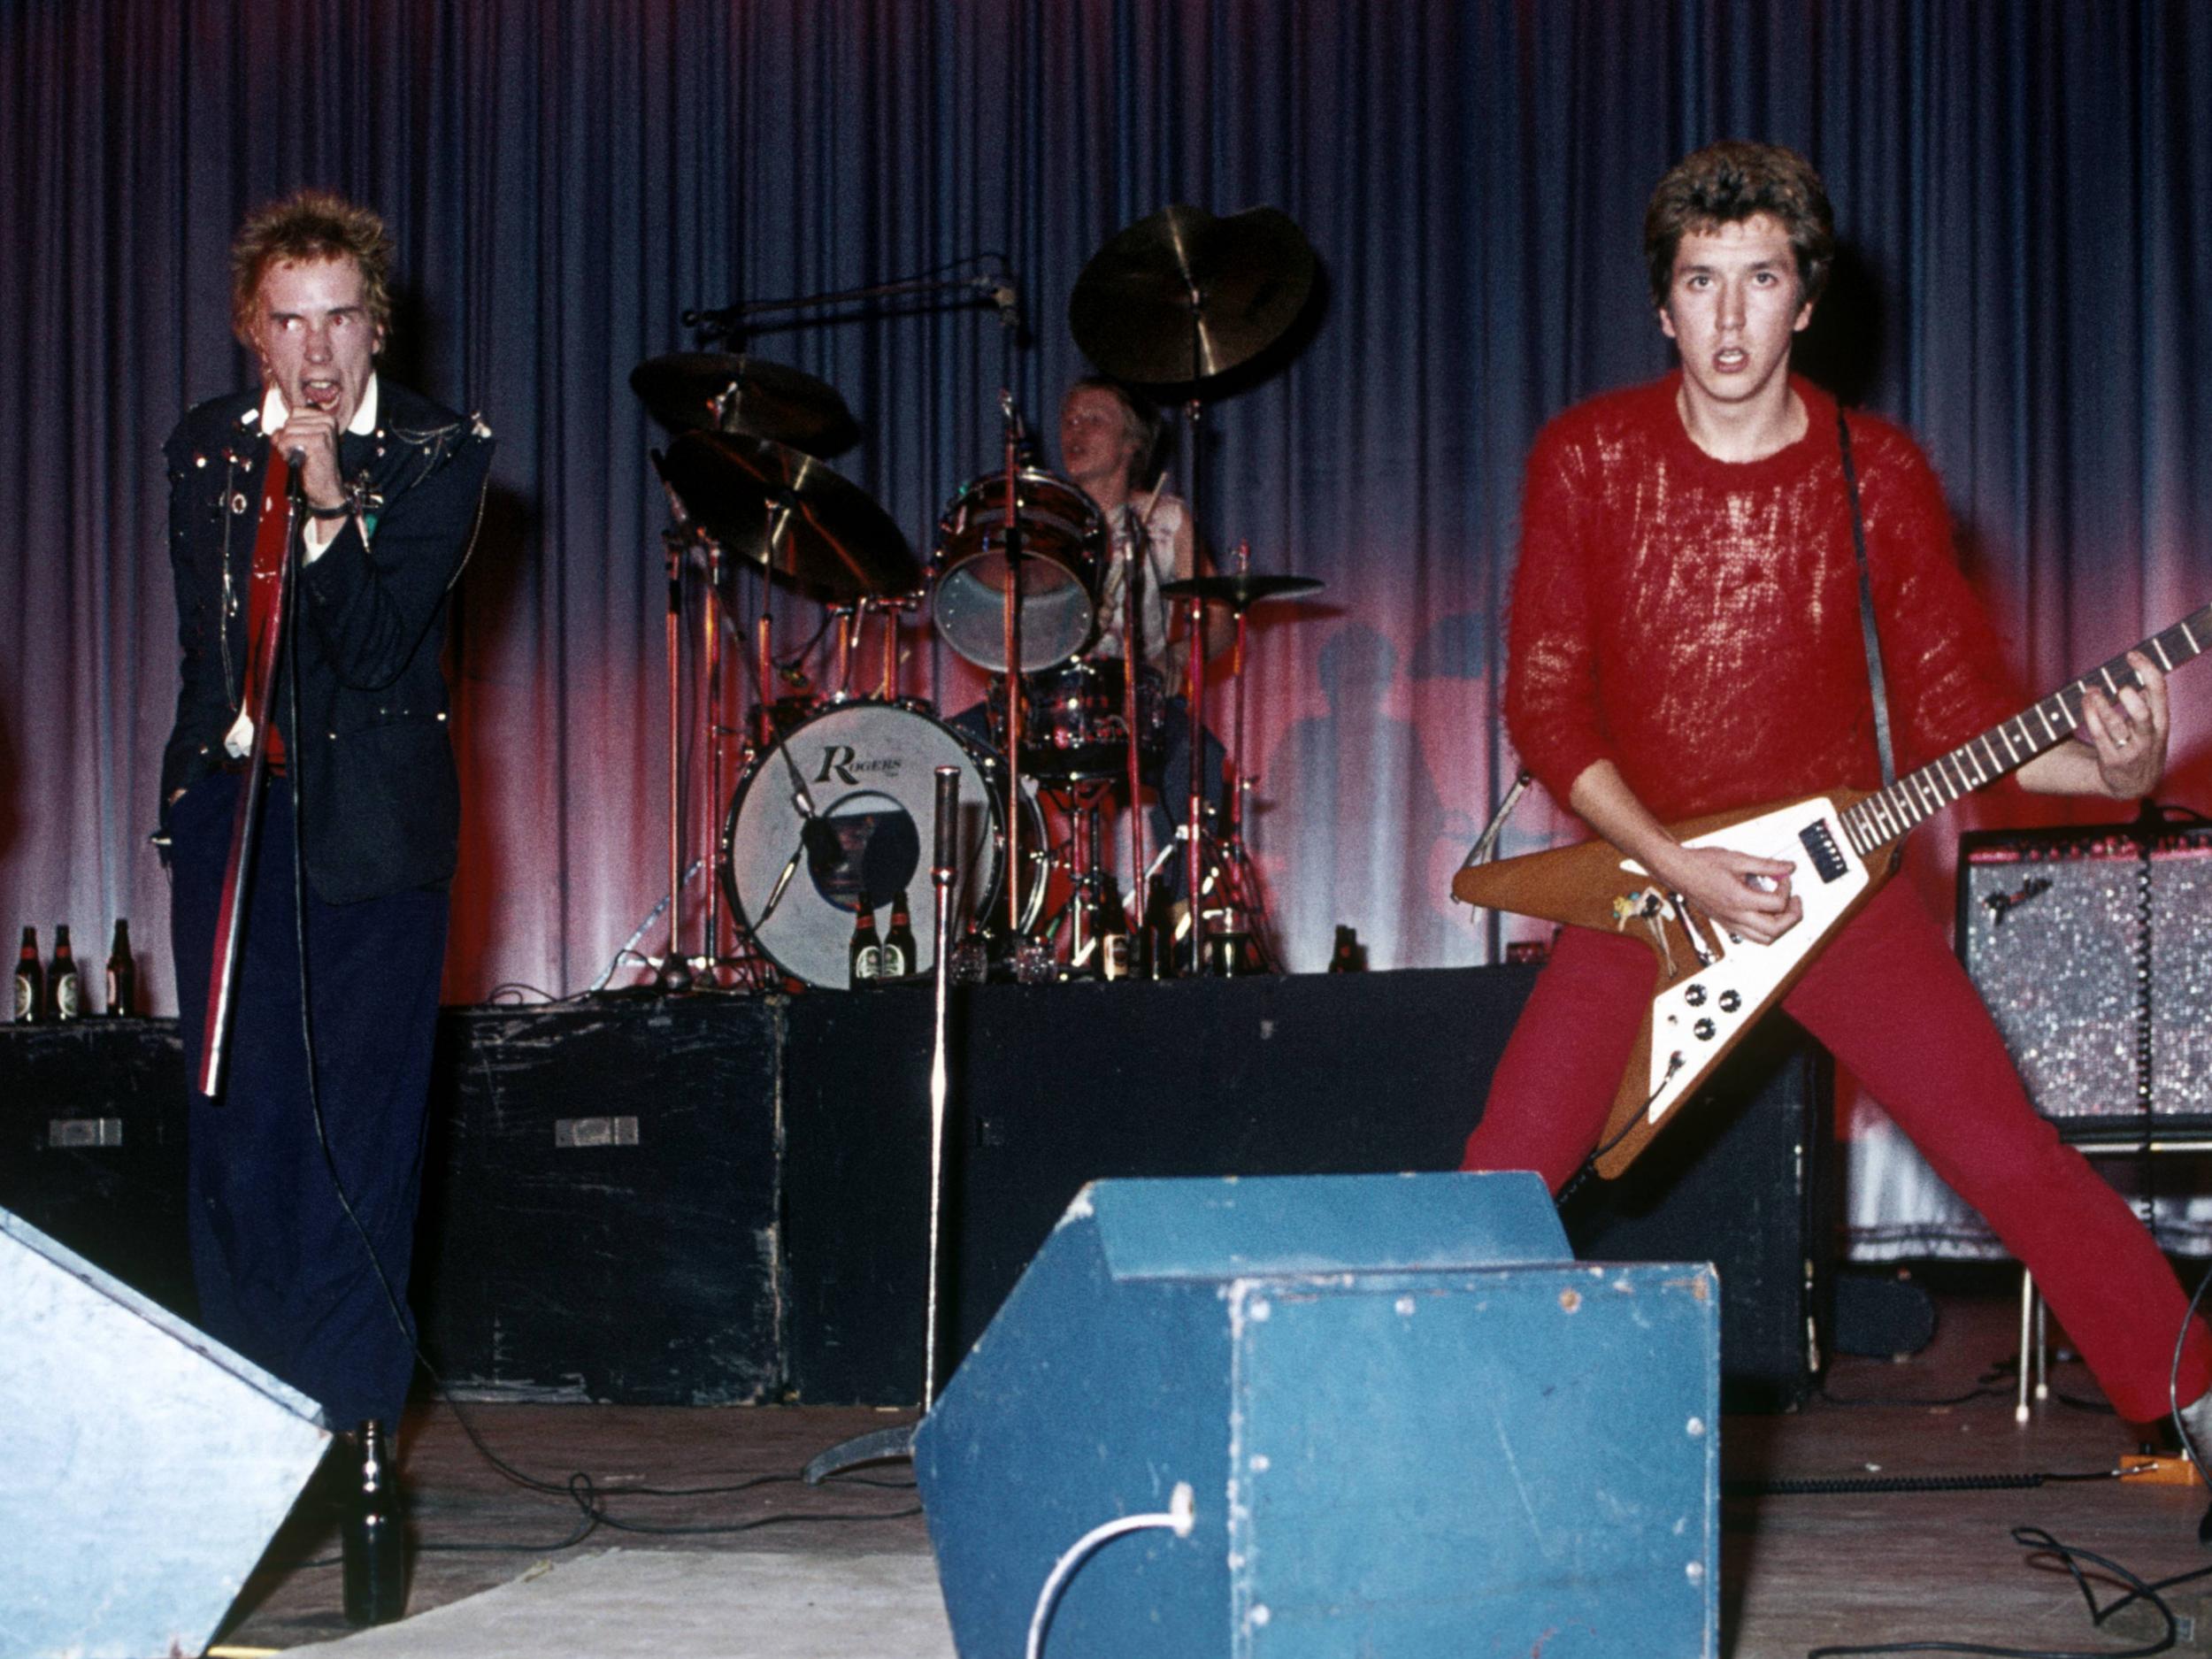 Pistol-packing: (from left) Johnny Rotten, Paul Cook and Steve Jones. Bassist Glen Matlock played on their only official album before being replaced by Sid Vicious